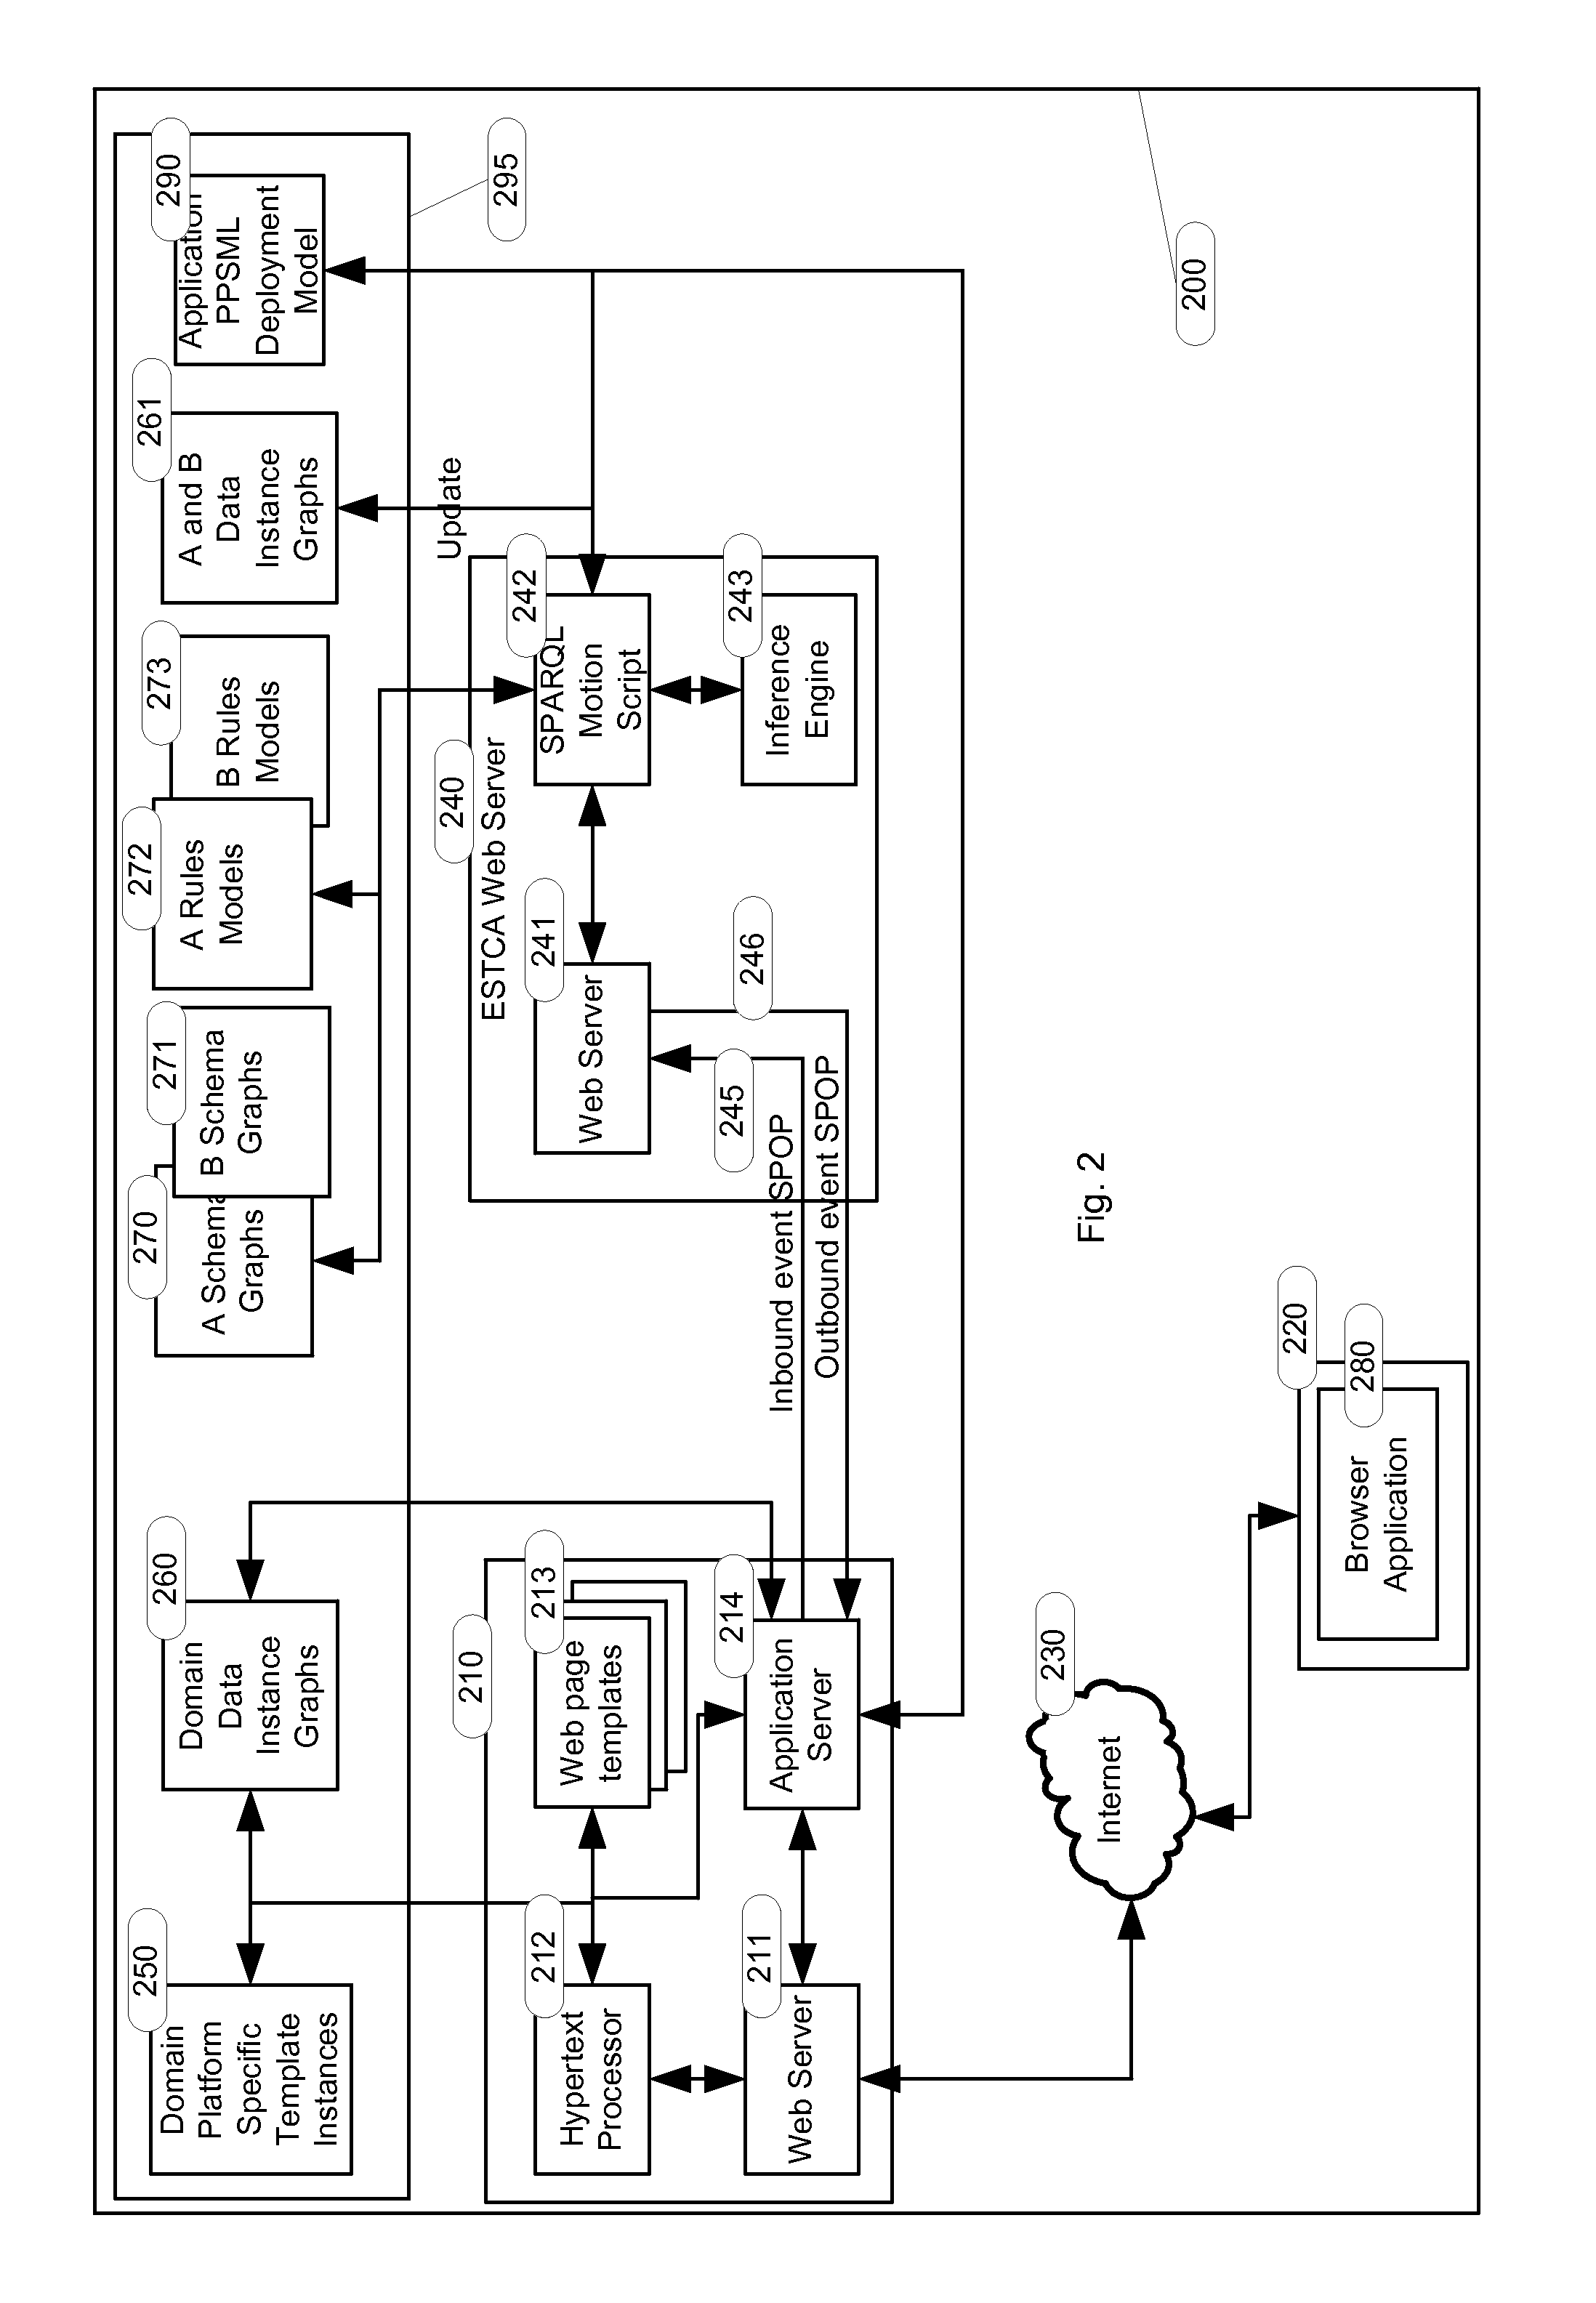 Computing device for state transitions of recursive state machines and a computer-implemented method for the definition, design and deployment of domain recursive state machines for computing devices of that type